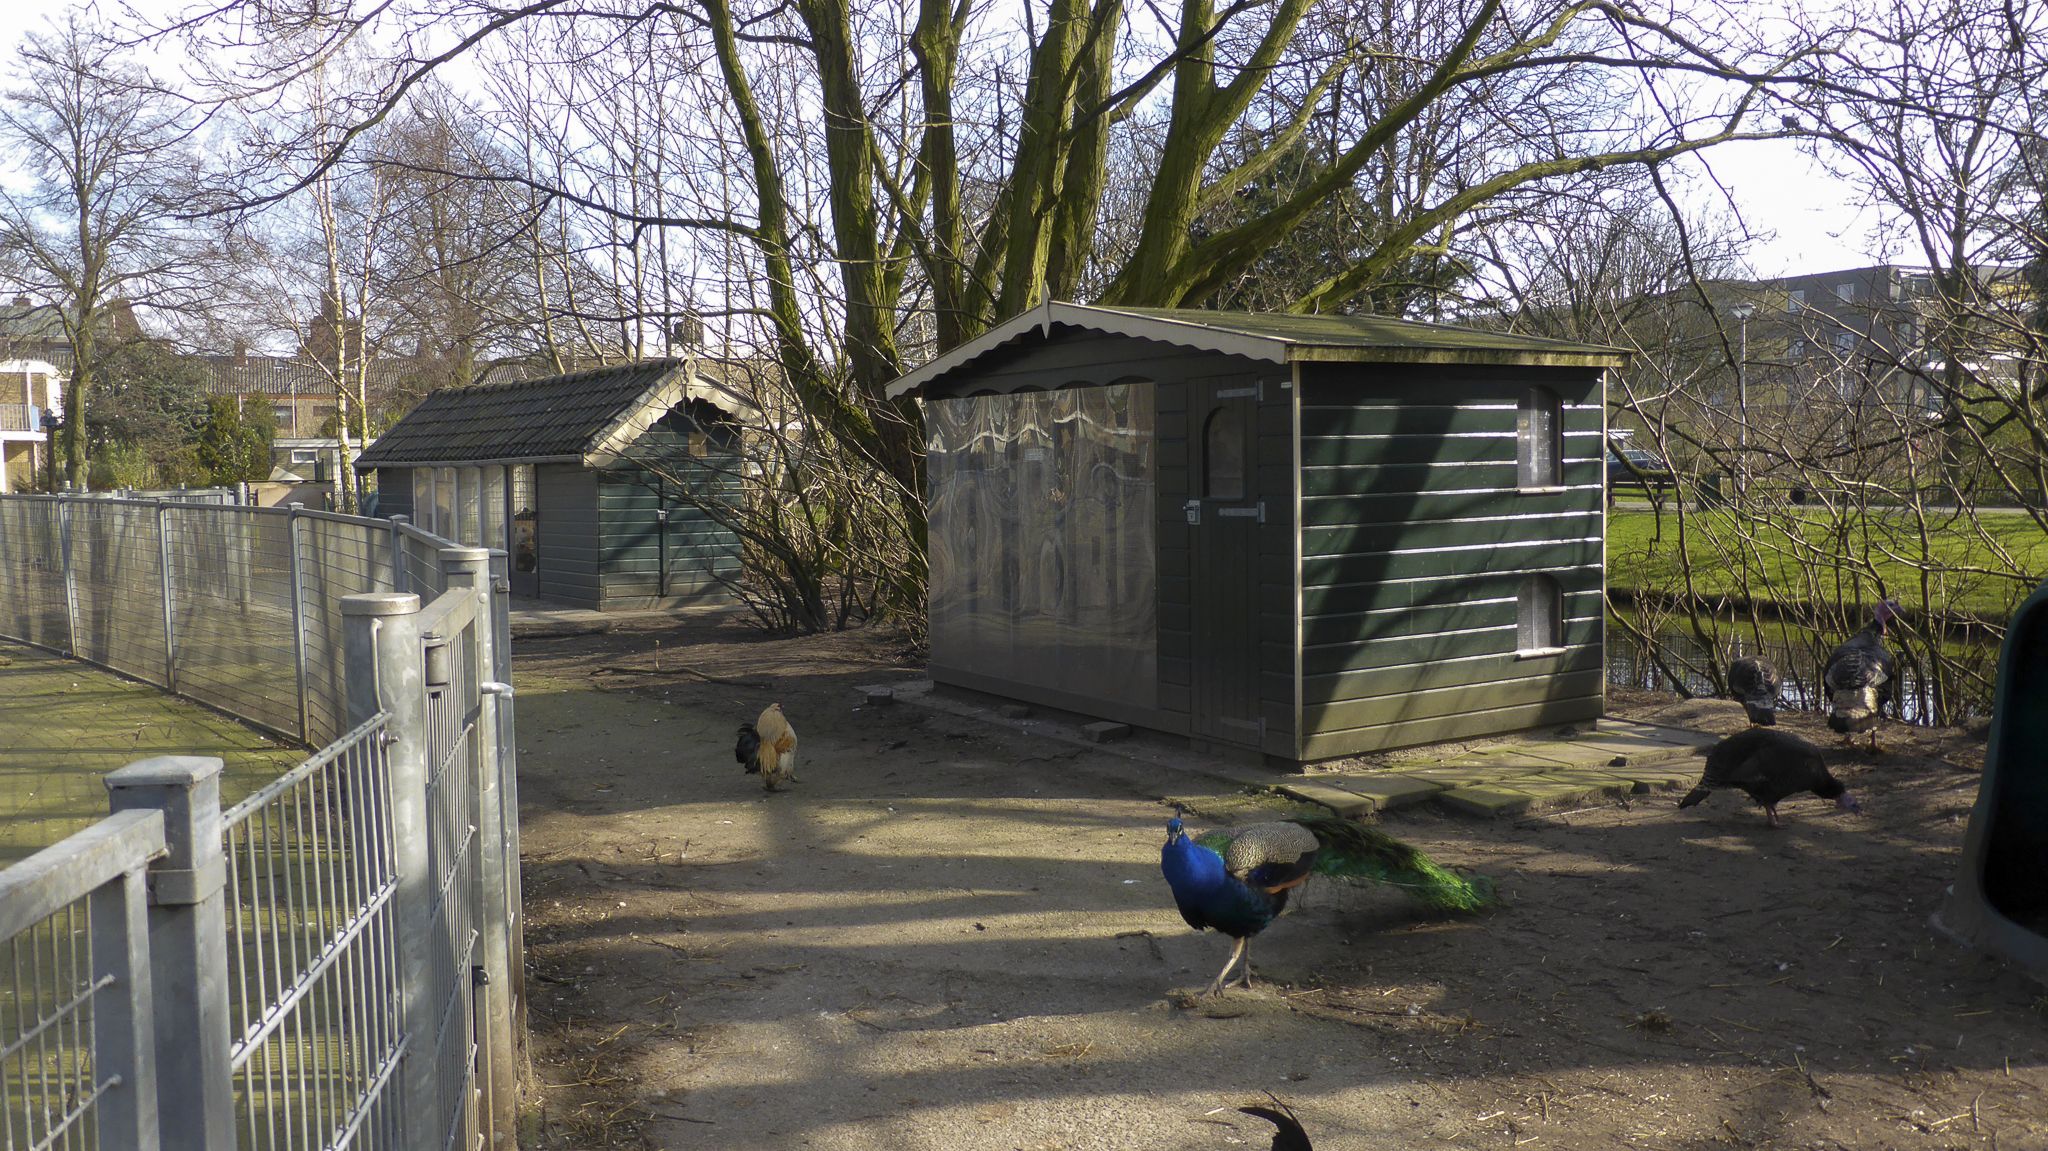 there are several peacocks and birds outside the small building